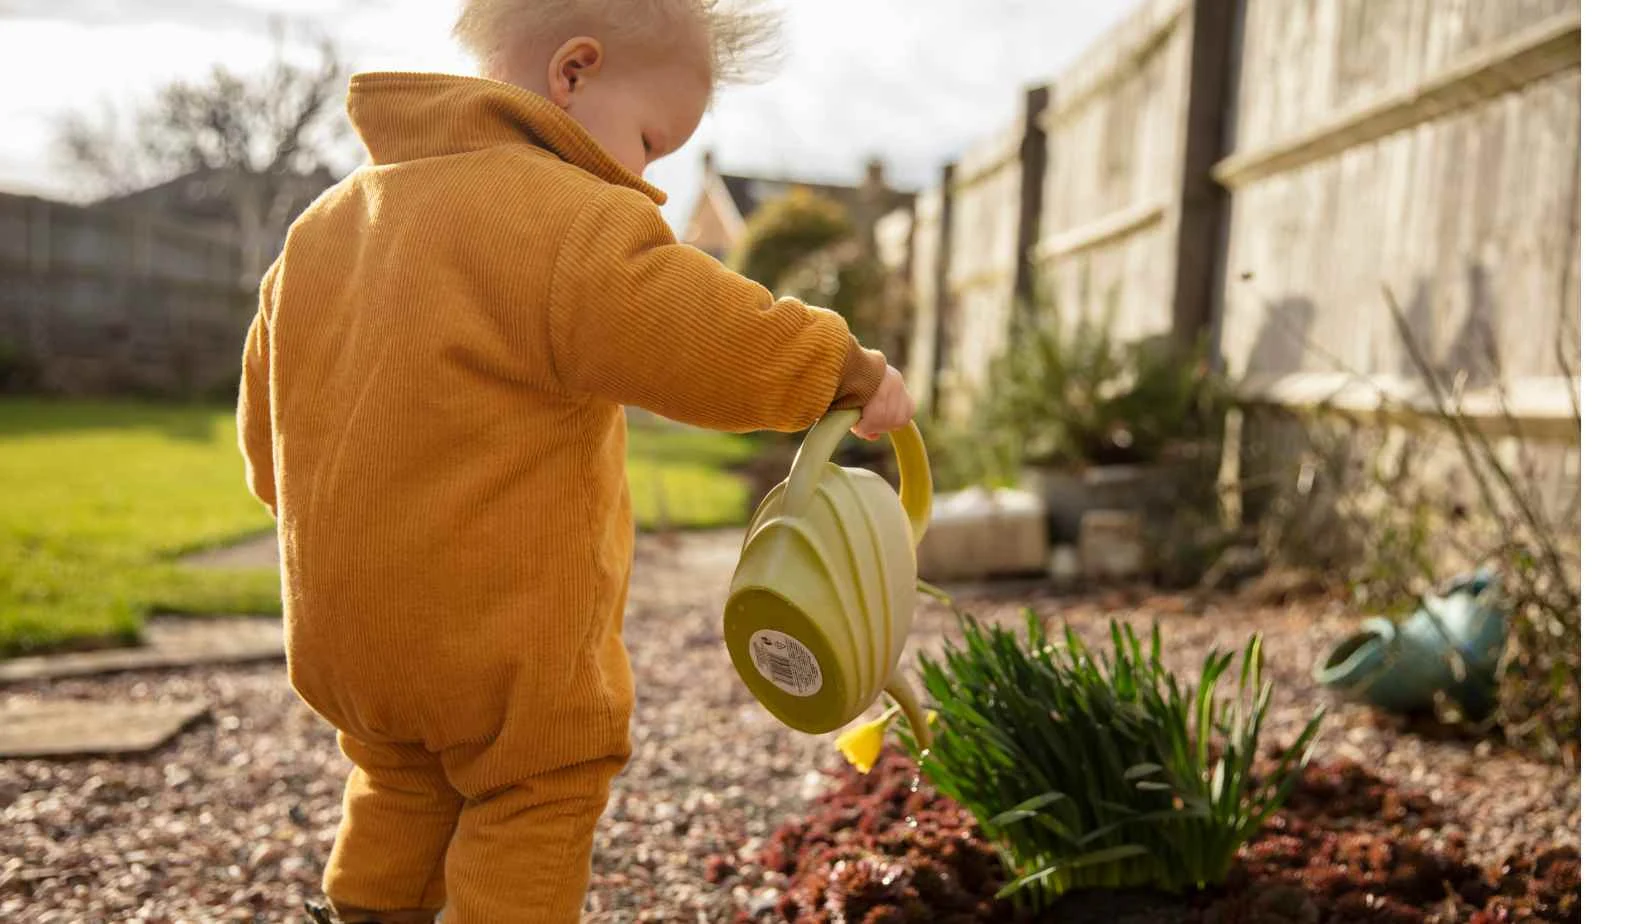 A toddler watering some plants, a stock image from Canva Pro